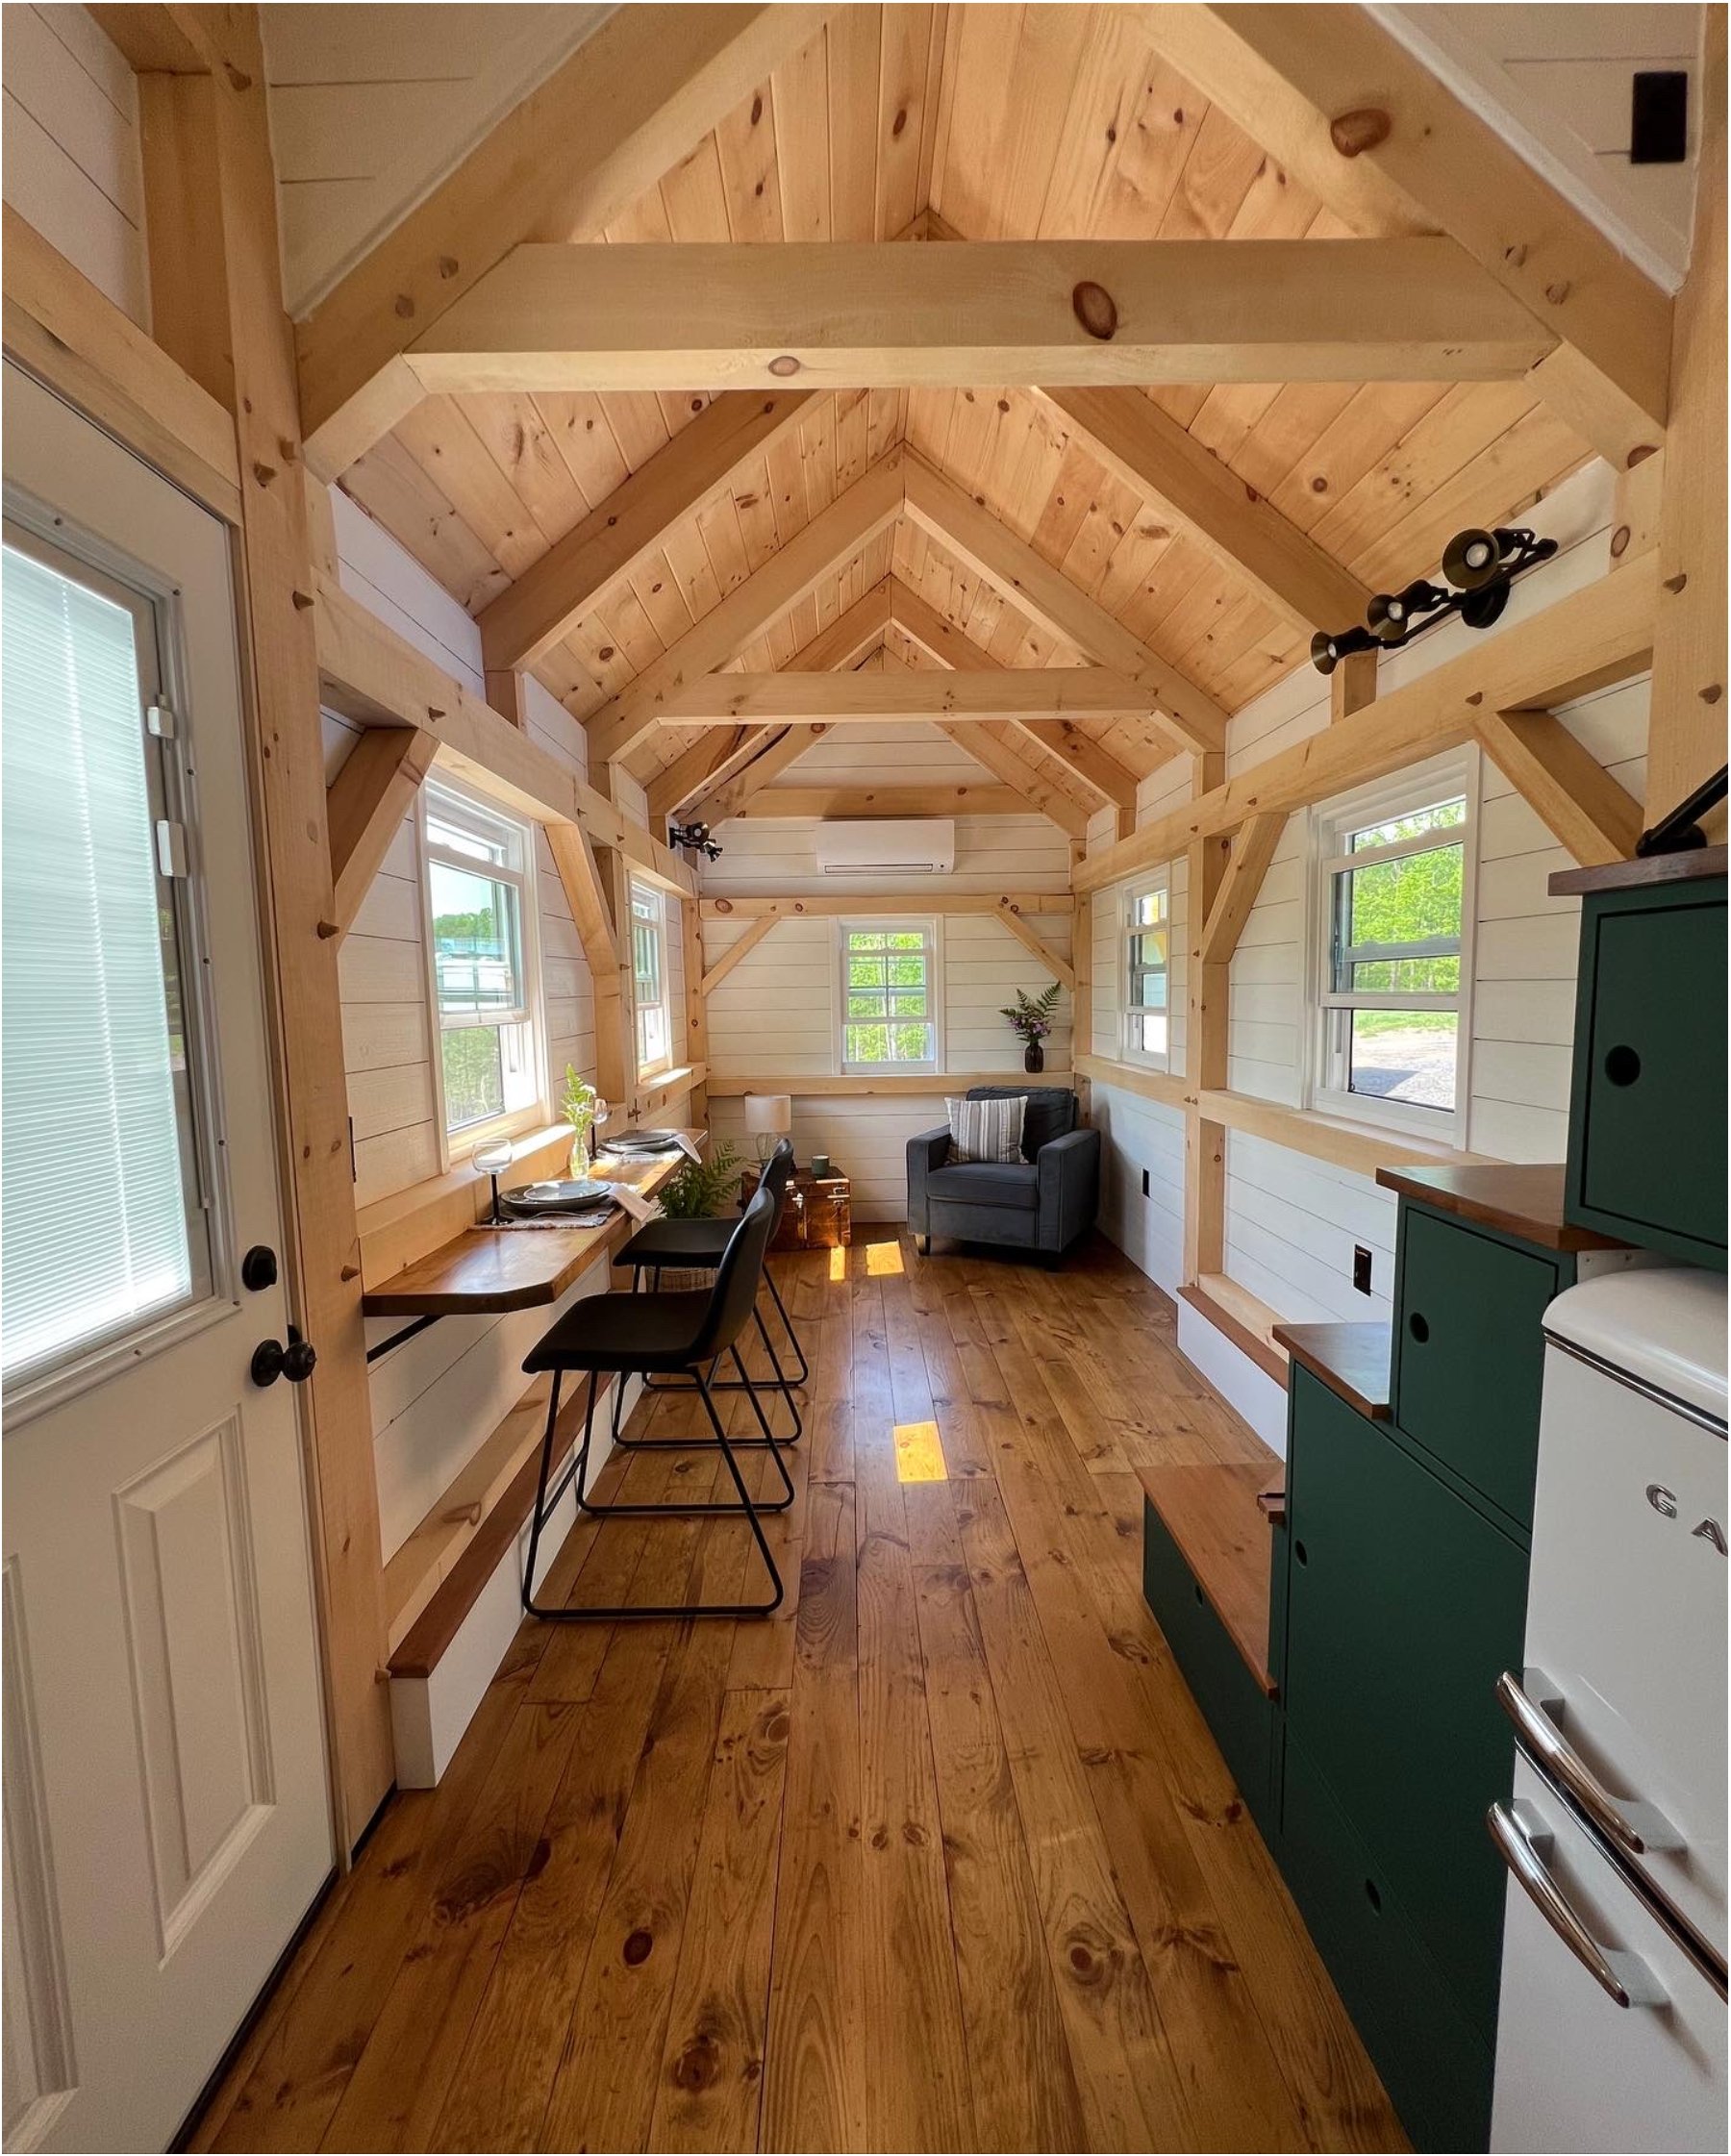 Tiny Homes For Sale - Tiny Timbers - Rustic Tiny Home